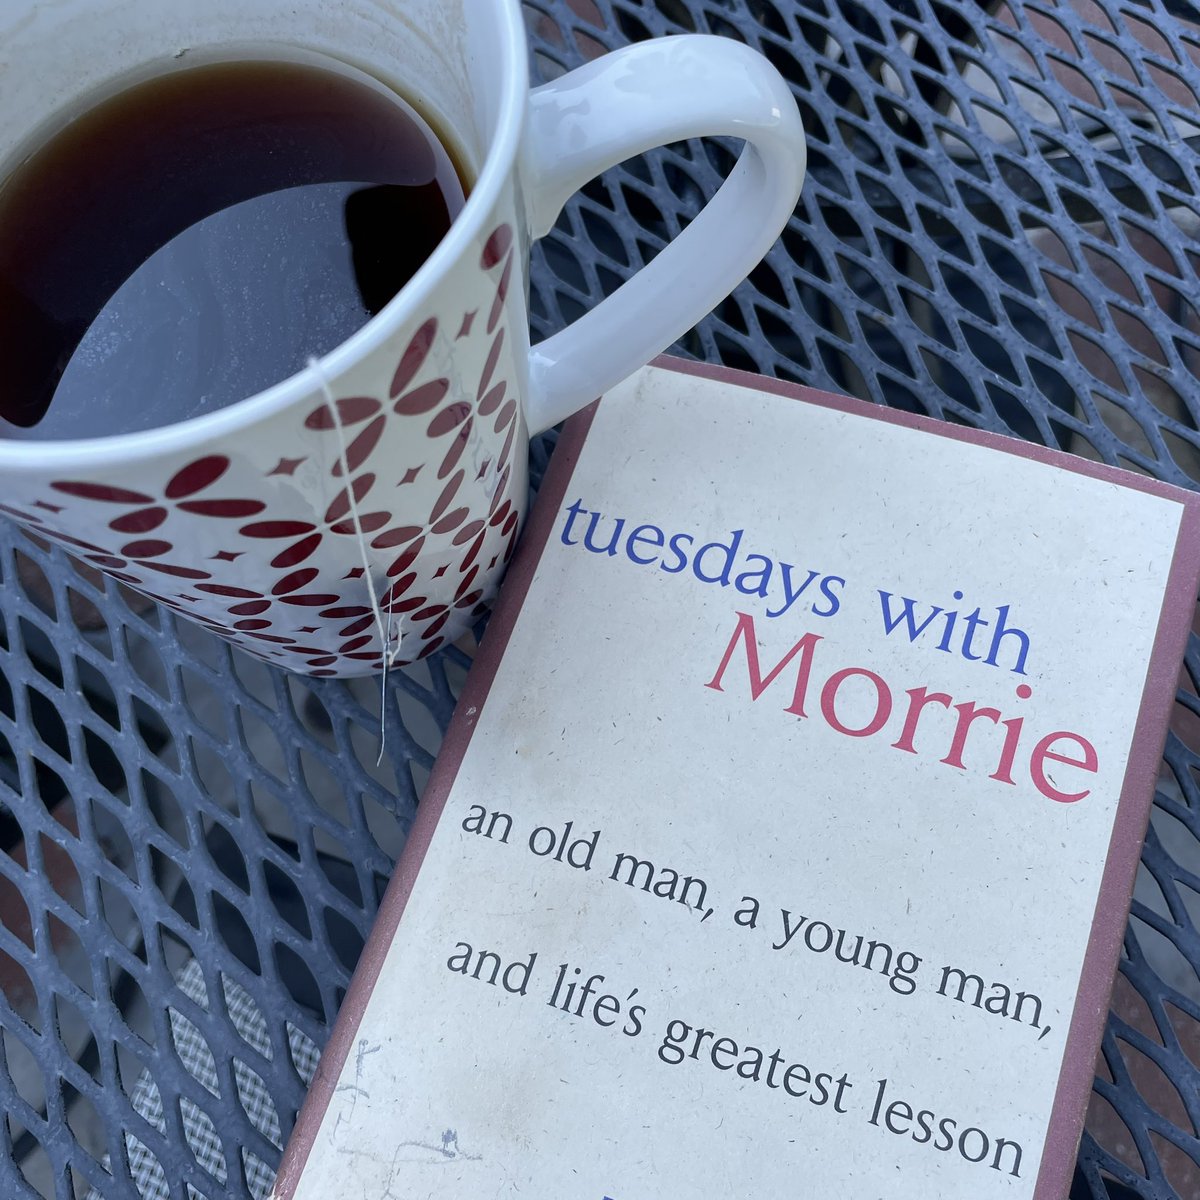 Tuesdays with Morrie is an option I’m considering for freshmen. What do you love about it? #iteachela